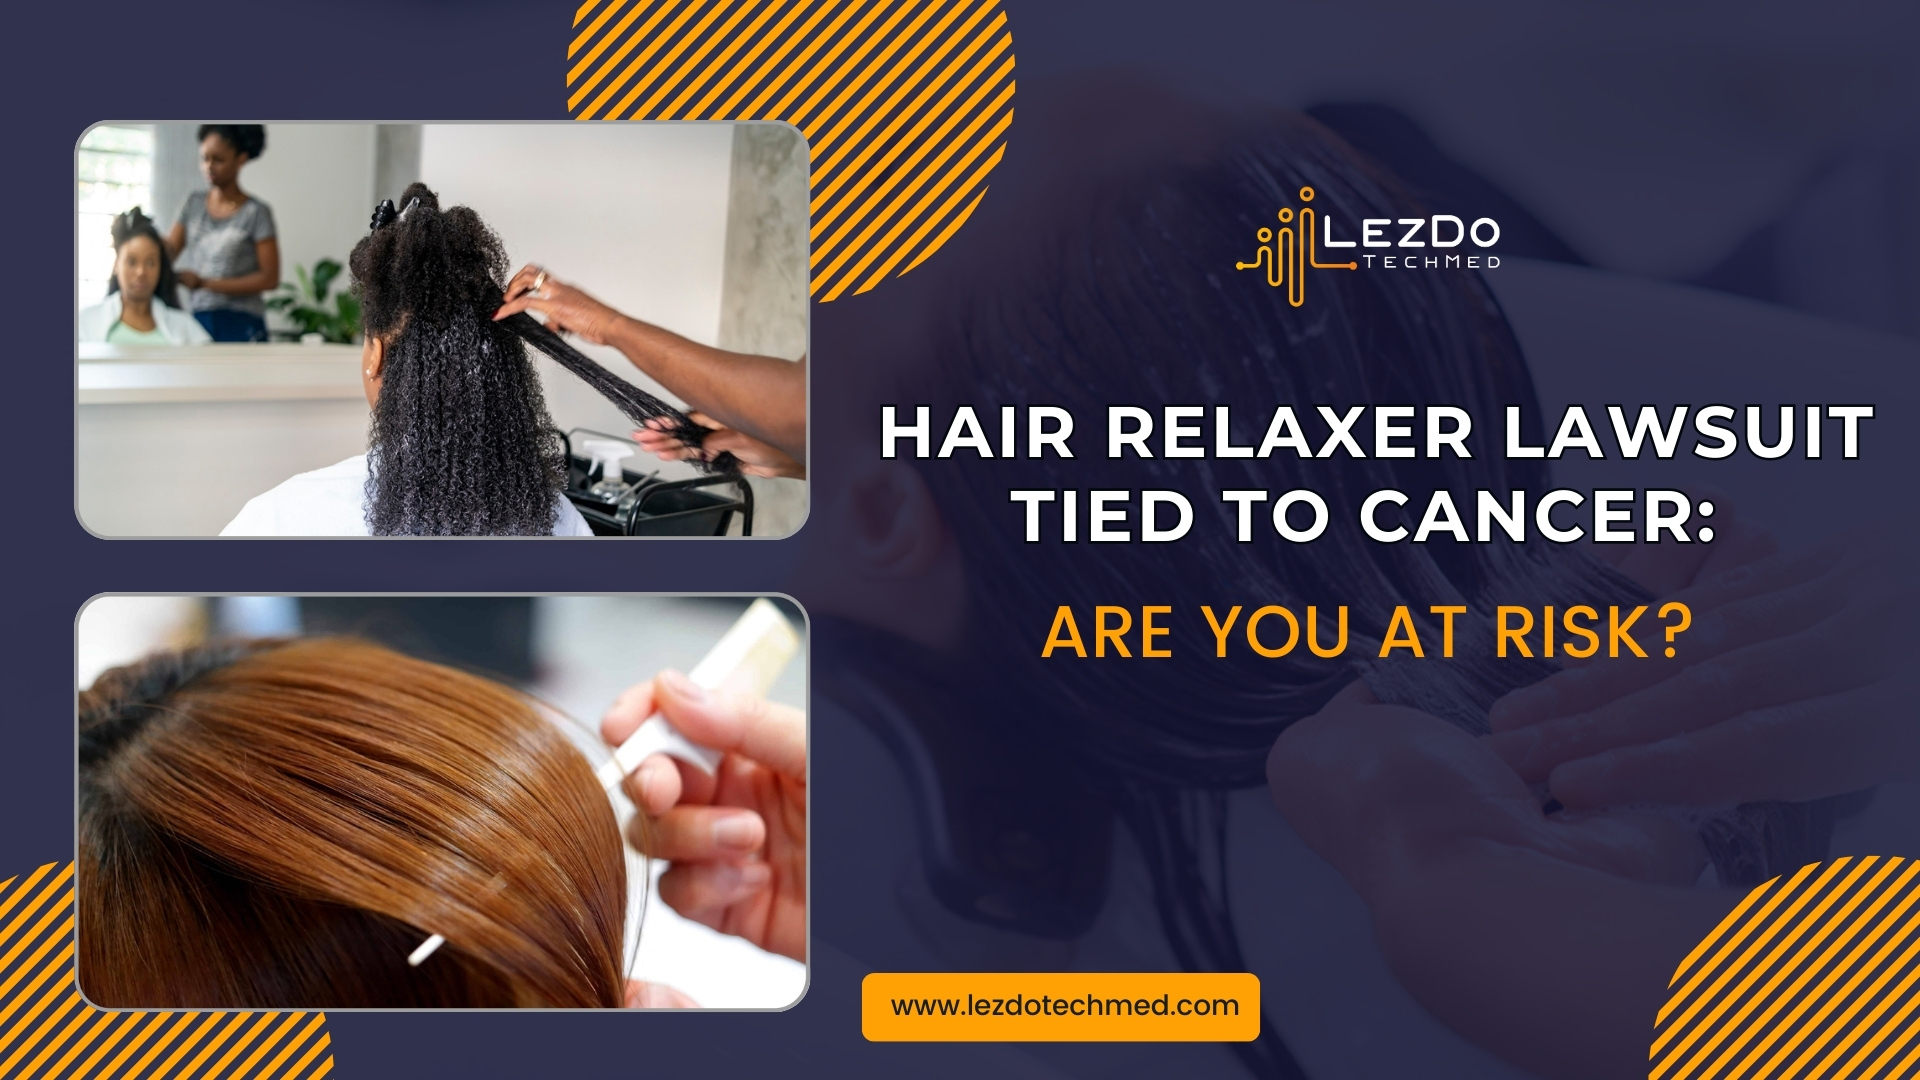 Hair Relaxer Lawsuit Tied to Cancer: Are You at Risk?